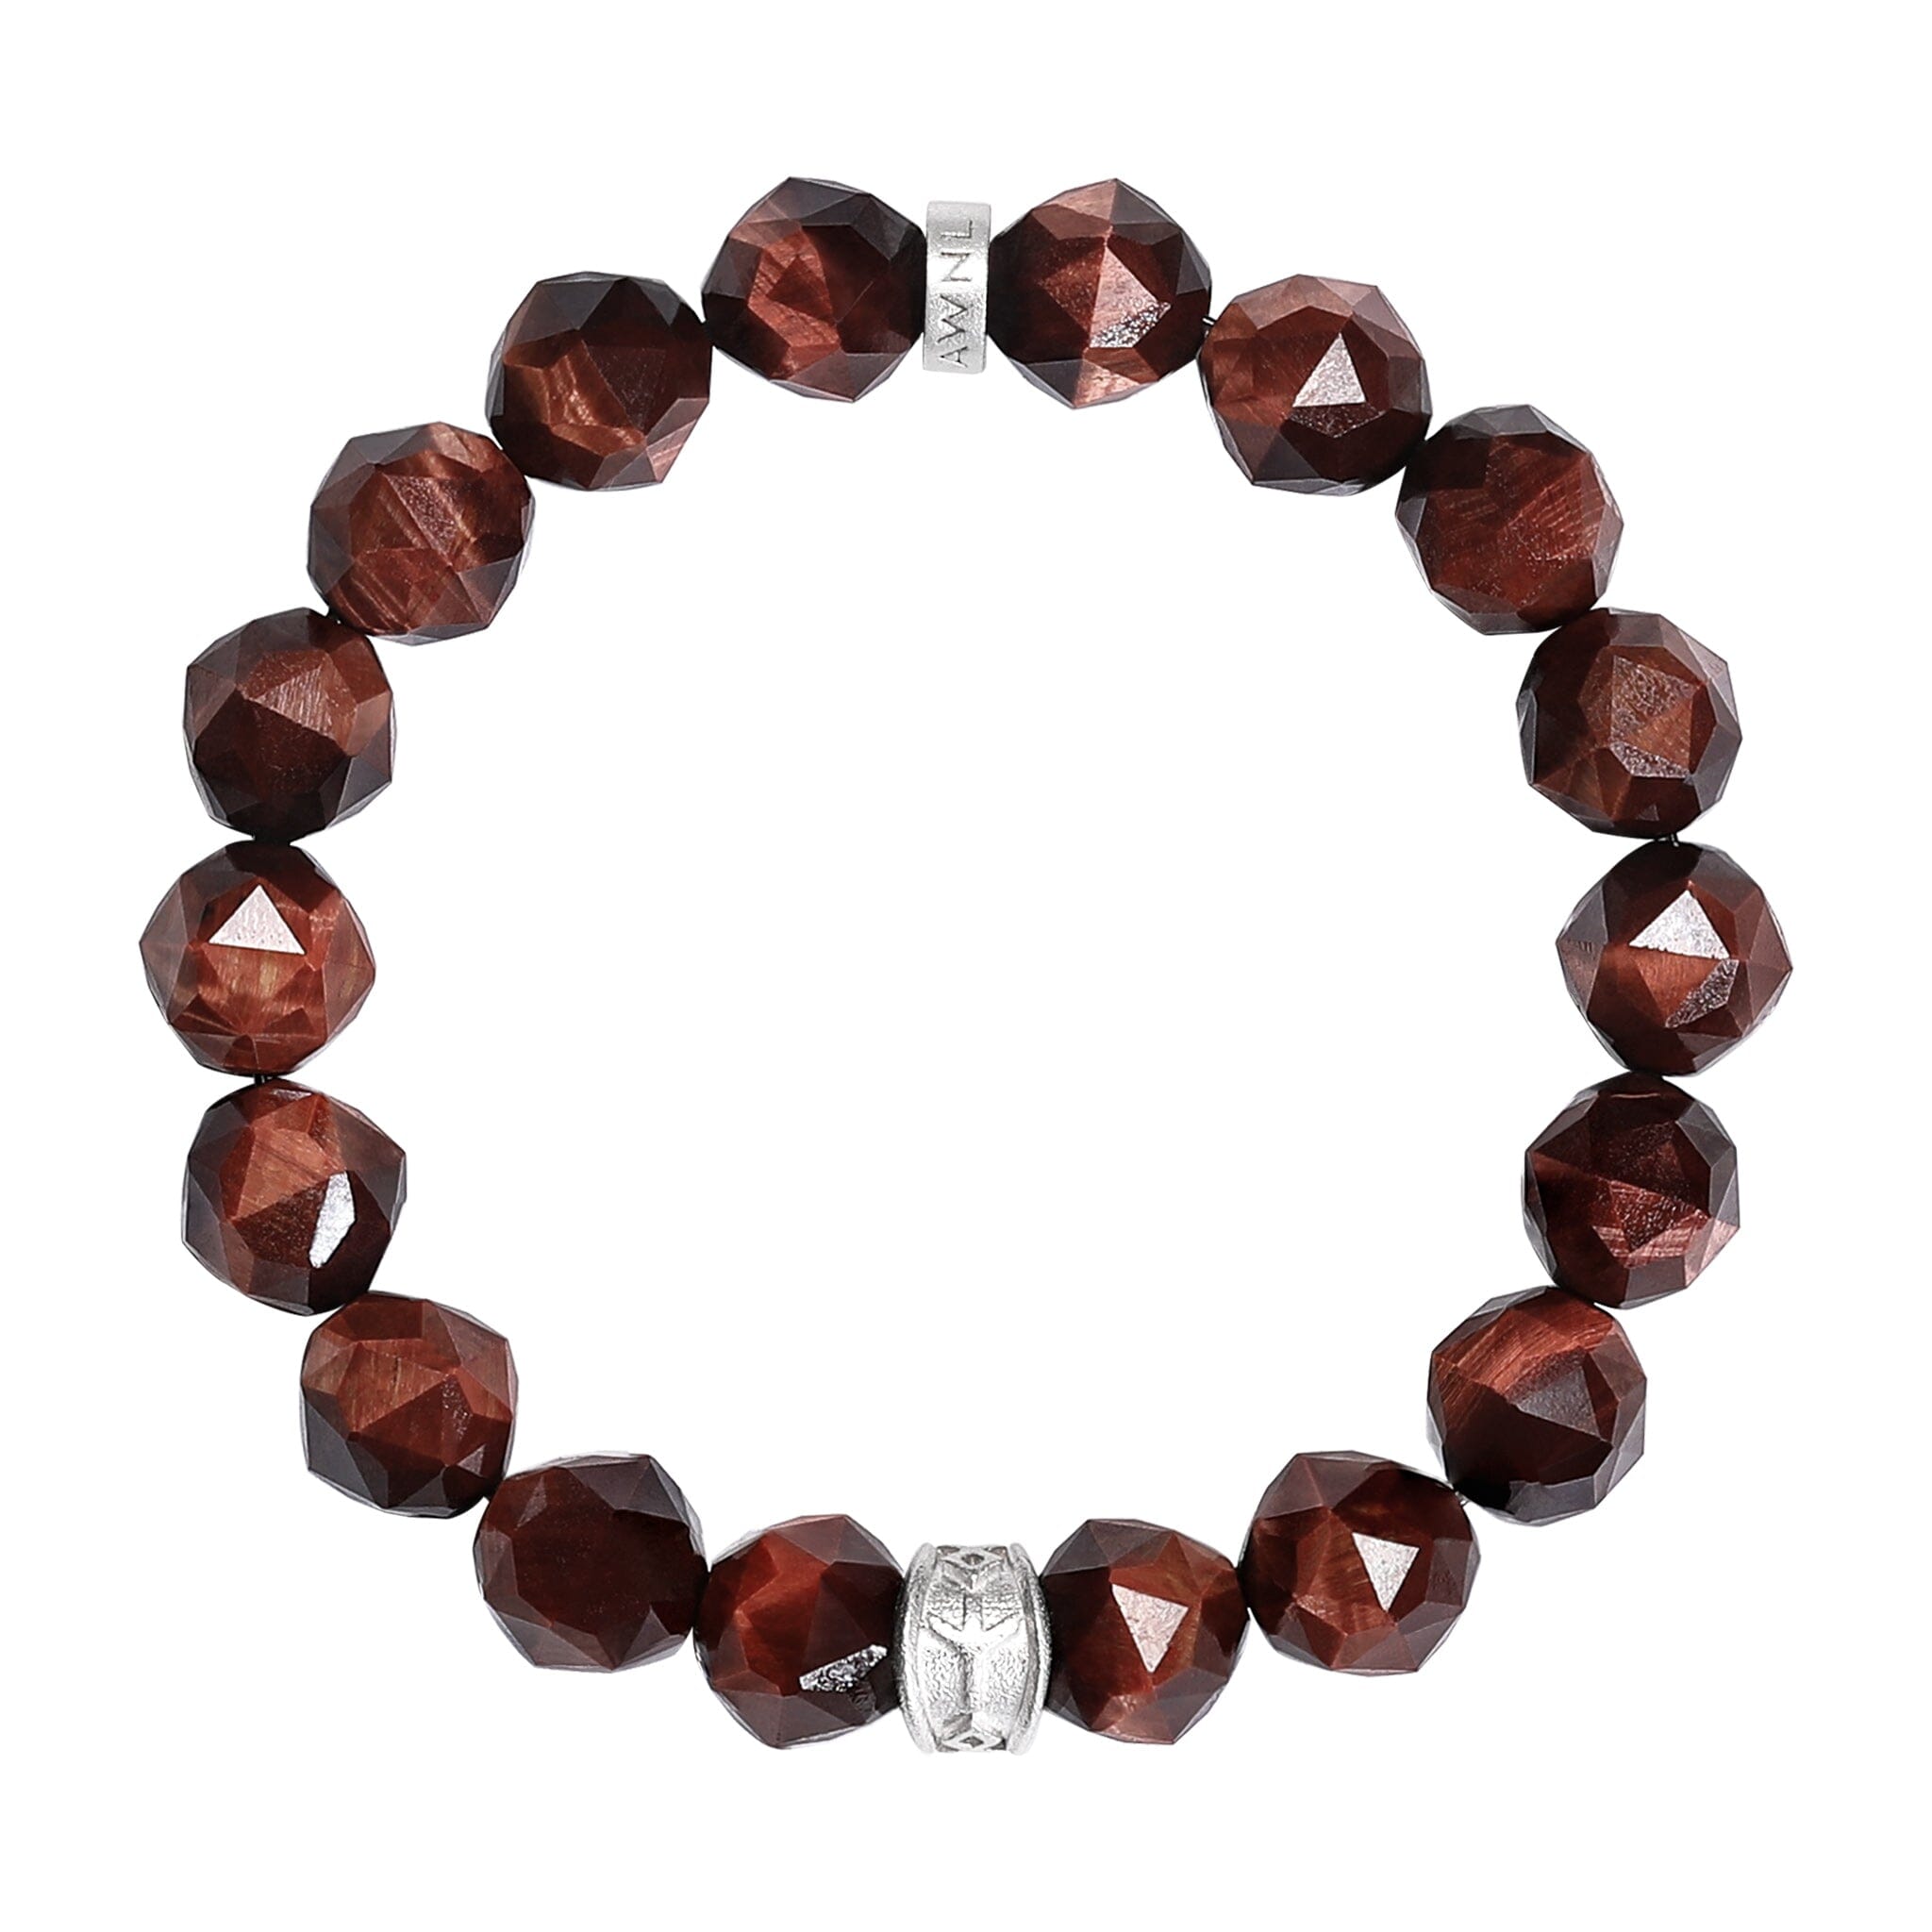 Men's Beaded Bracelet with Engraved Runes and Tiger Eye Bracelets WAA FASHION GROUP 